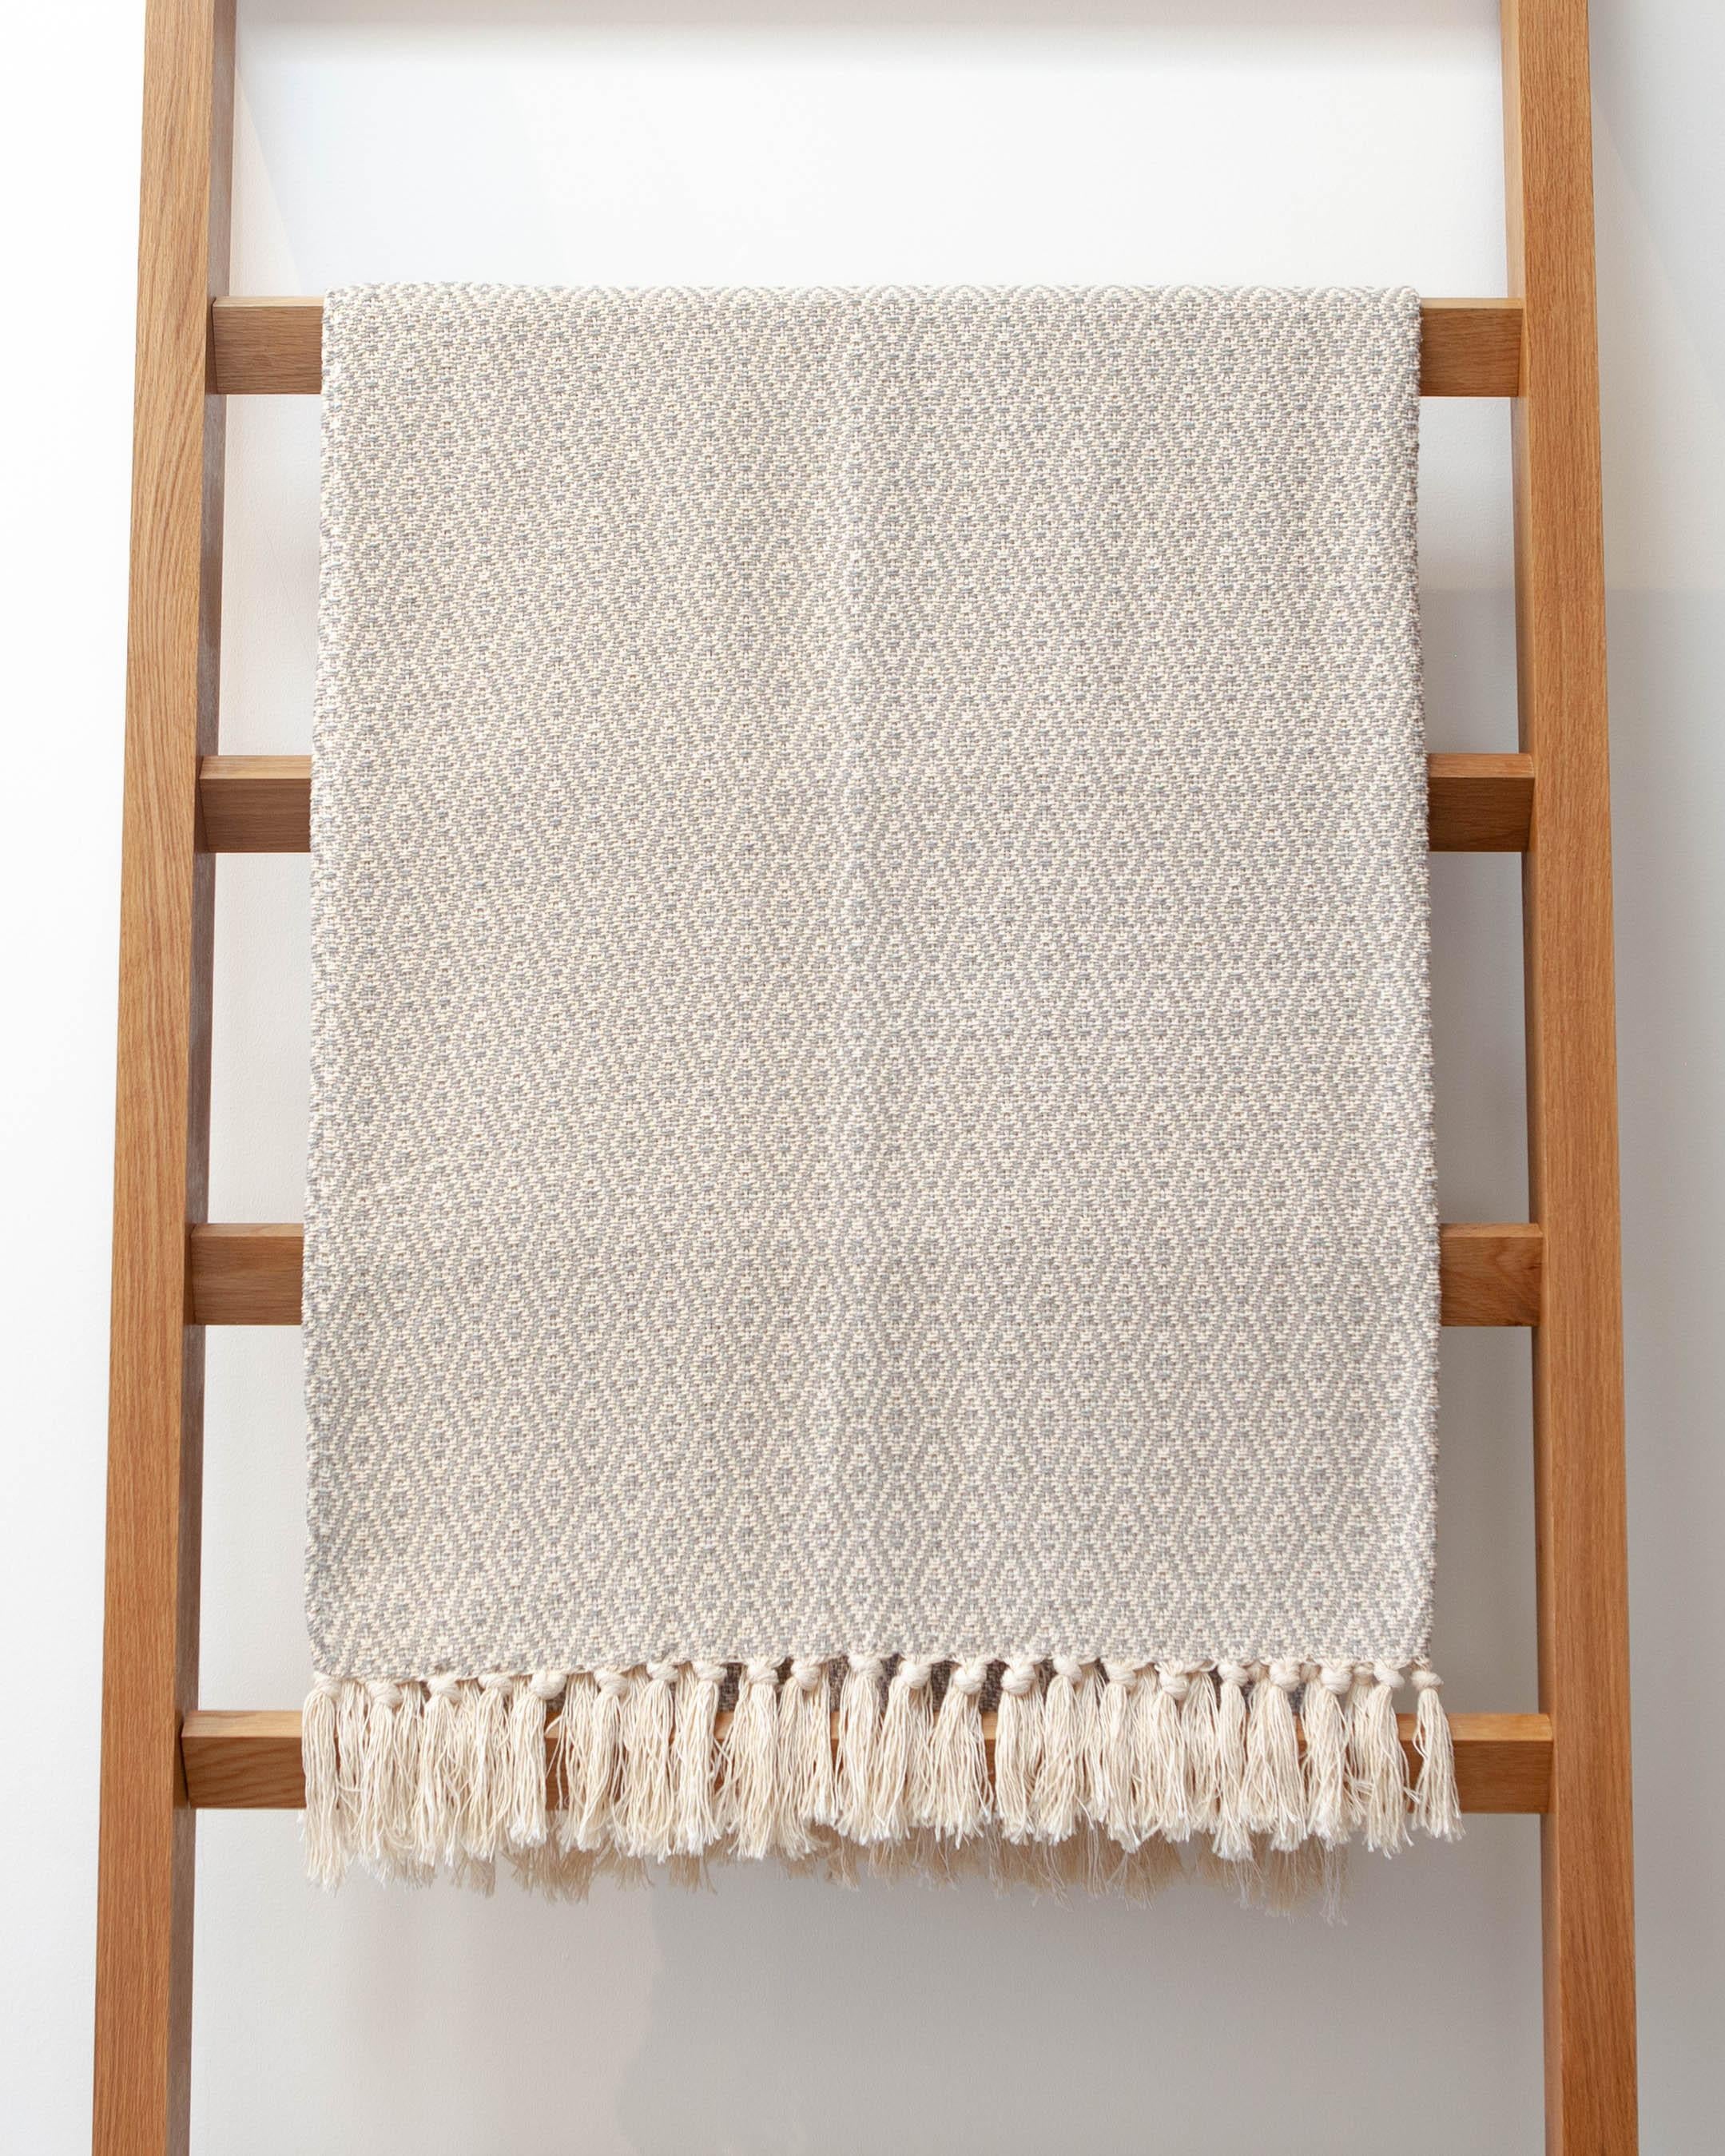 Handwoven Fringed Cotton Throw in Grey and Natural, in Stock In New Condition For Sale In West Hollywood, CA